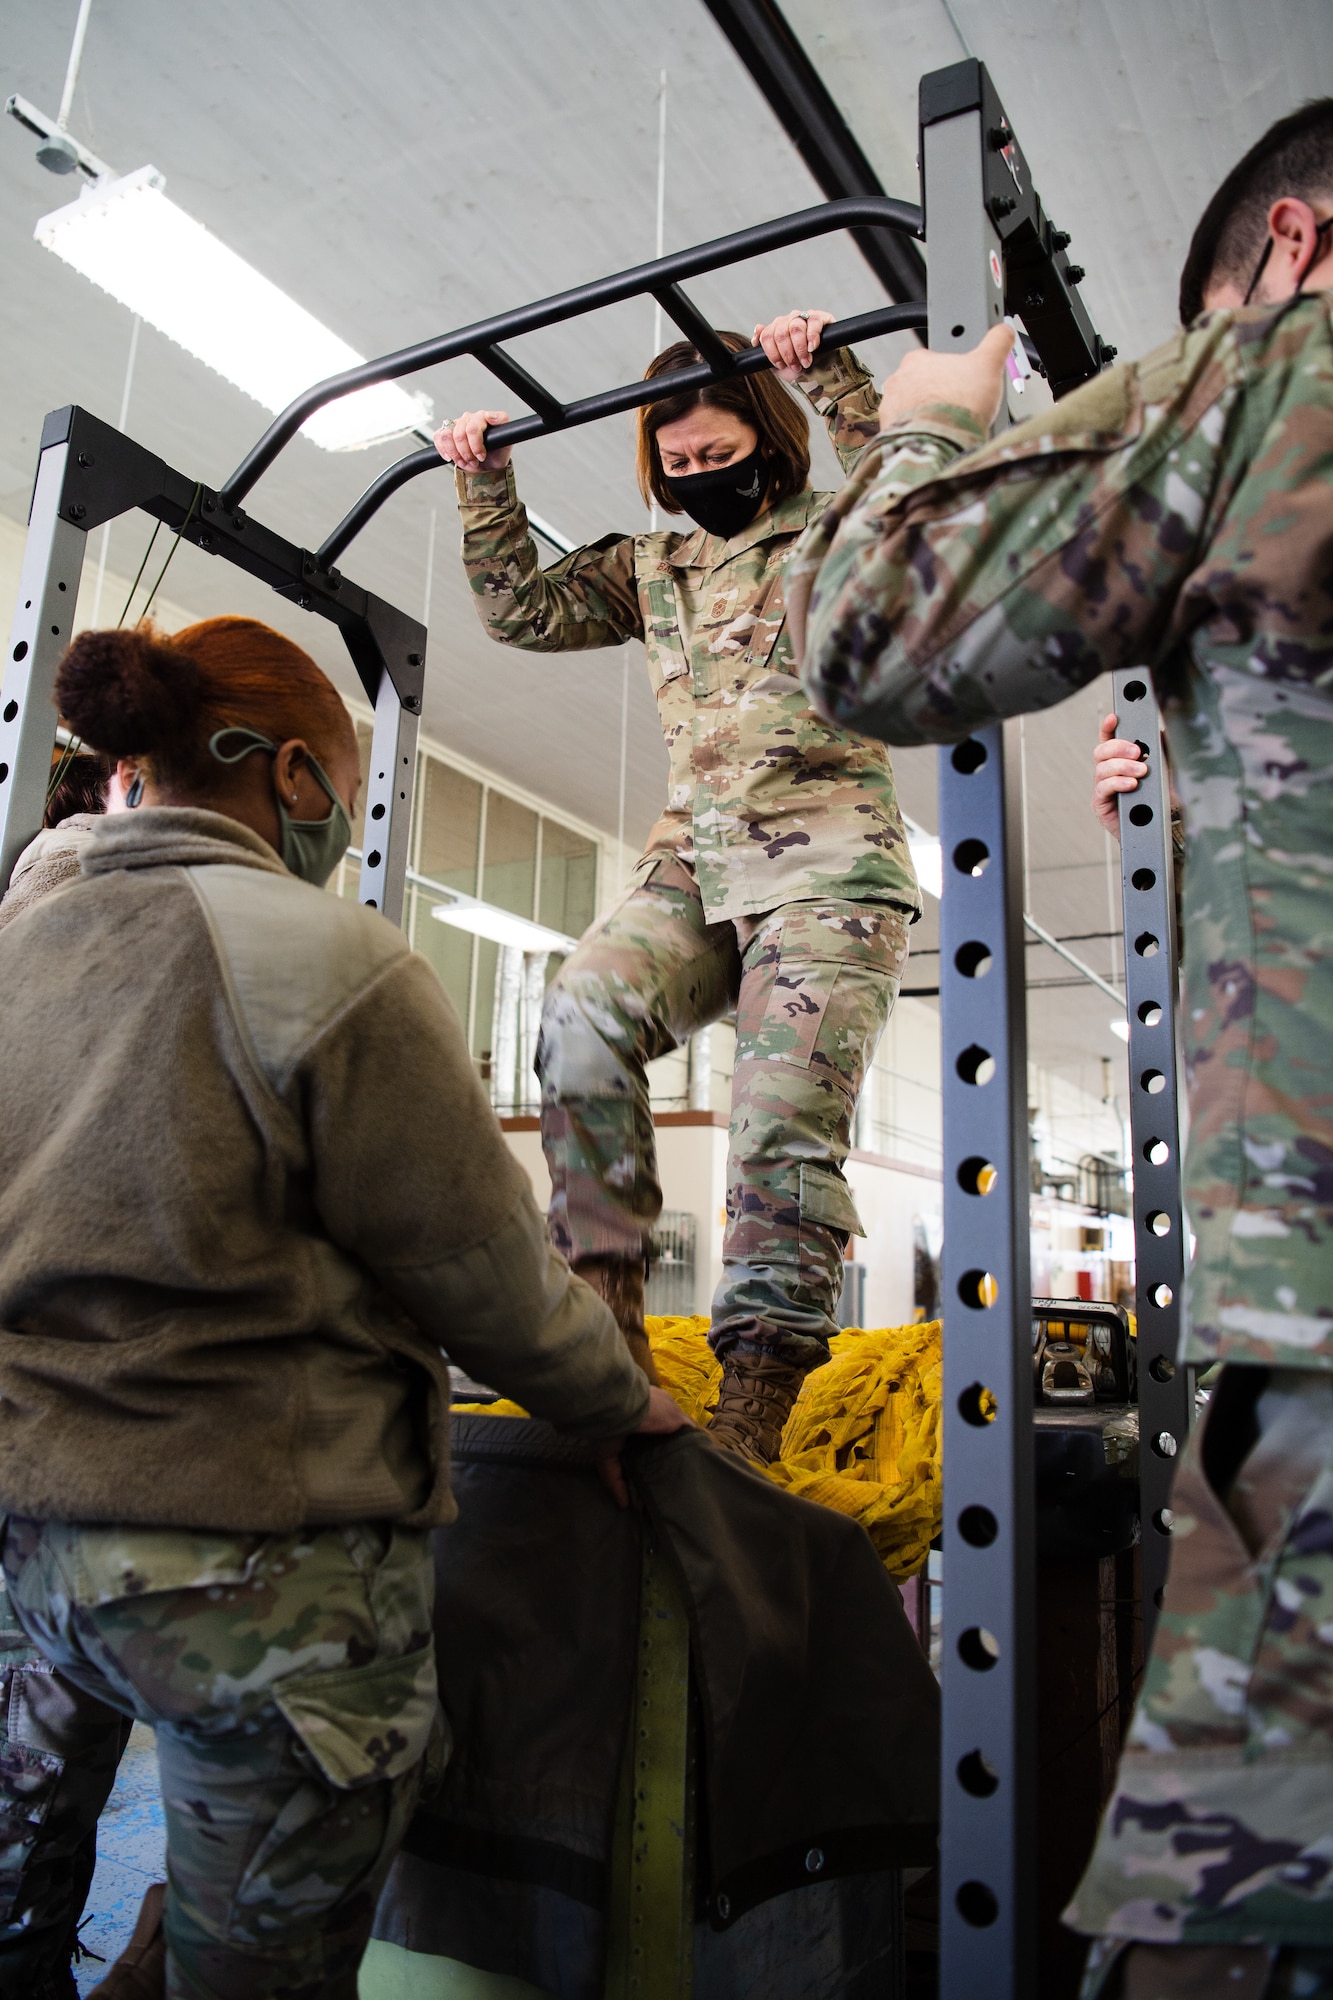 Chief Master Sgt. of the Air Force JoAnne S. Bass packs a B-52H Stratofortress parachute during her visit to Barksdale Air Force Base, Louisiana, April 22, 2021. During the tour, Bass familiarized herself with the mission of the 2nd Bomb Wing. (U.S. Air Force photo by Airman 1st Class Jacob B. Wrightsman)